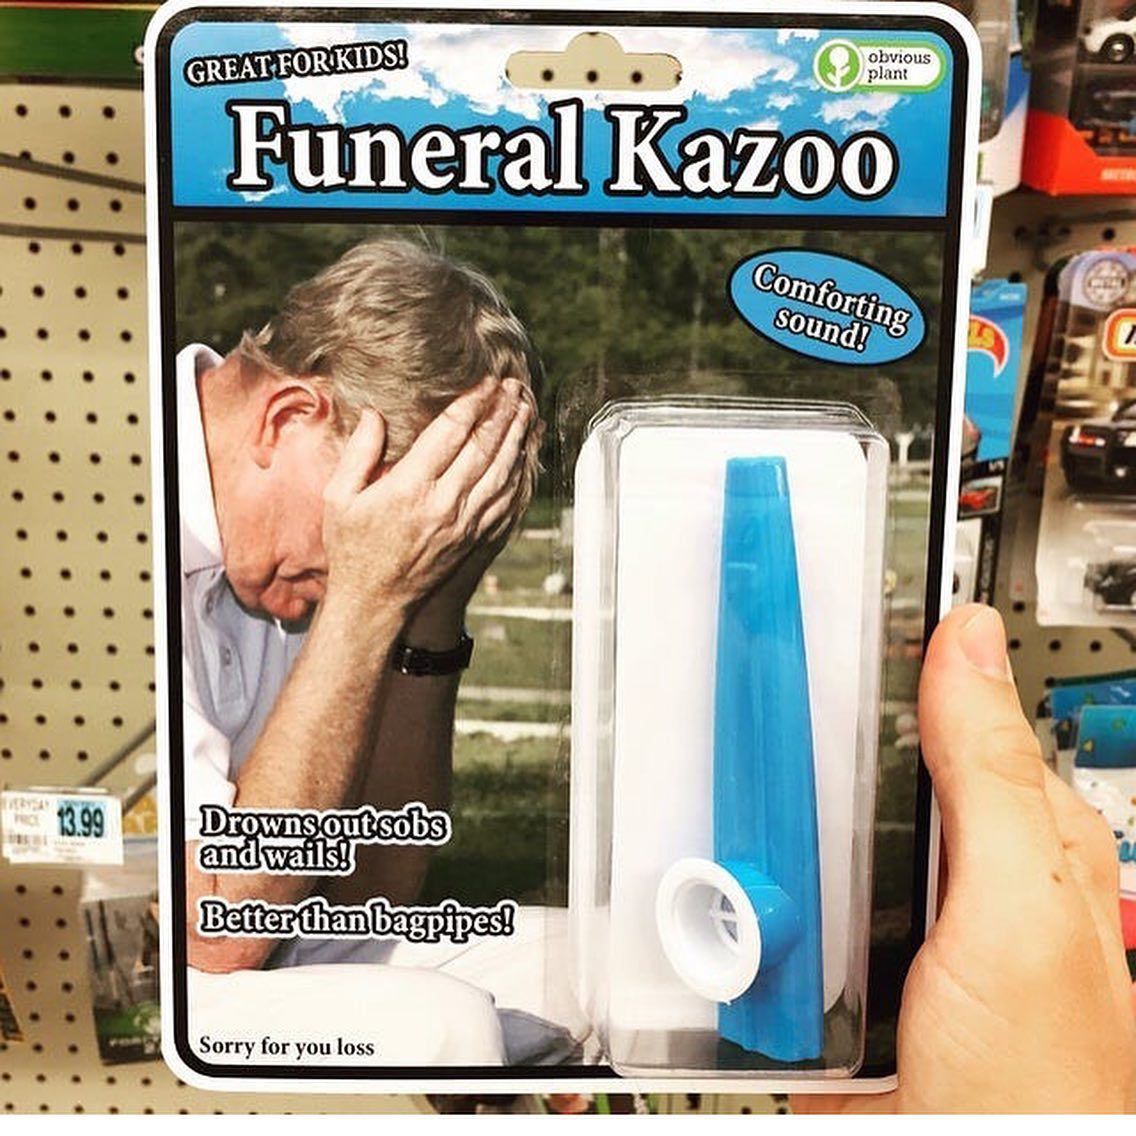 More like FUNeral